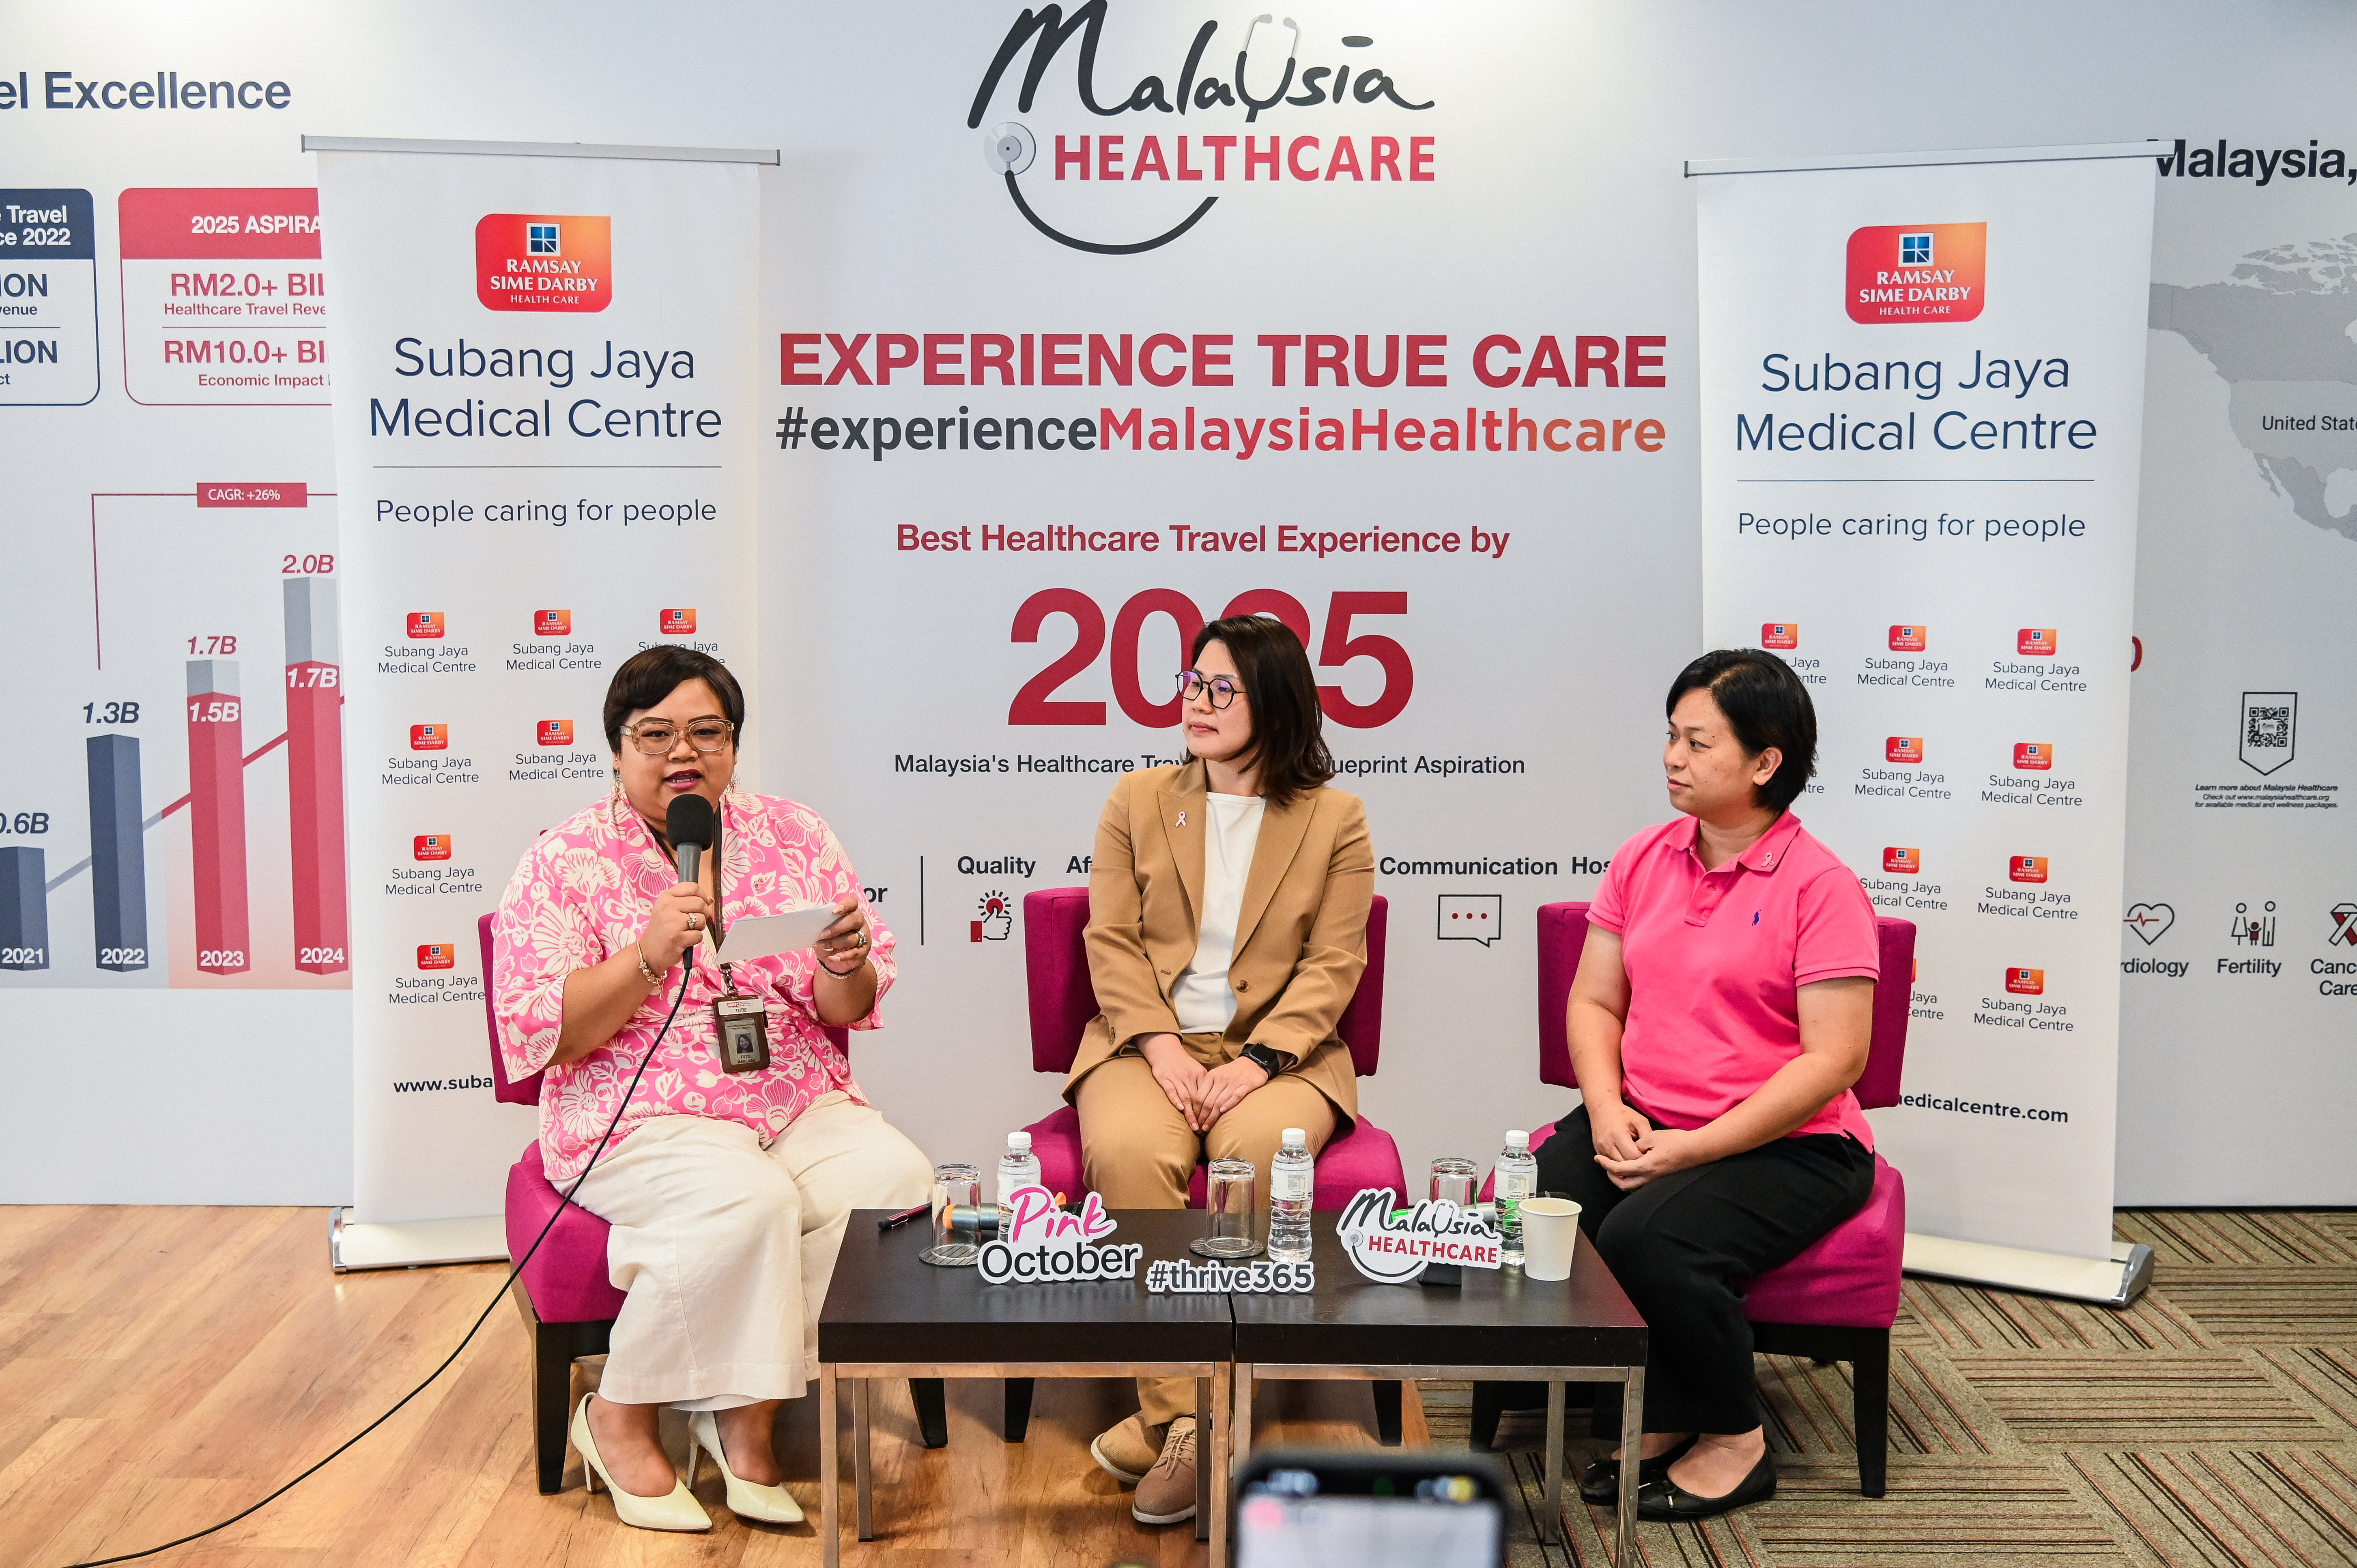 (From Left) Ms. Tutie Ismail, Vice President of Communications at MHTC moderating the session with the panelist from Subang Jaya Medical Centre (SJMC); Dr. Teh Mei Sze, Consultant Breast Surgeon (Oncoplastic) Subang Jaya Medical Centre; Ms. Yoon Sook Yee, Certified Genetic Counsellor Subang Jaya Medical Centre at MHTC Breast Cancer Awareness Day “Thrive 365”.